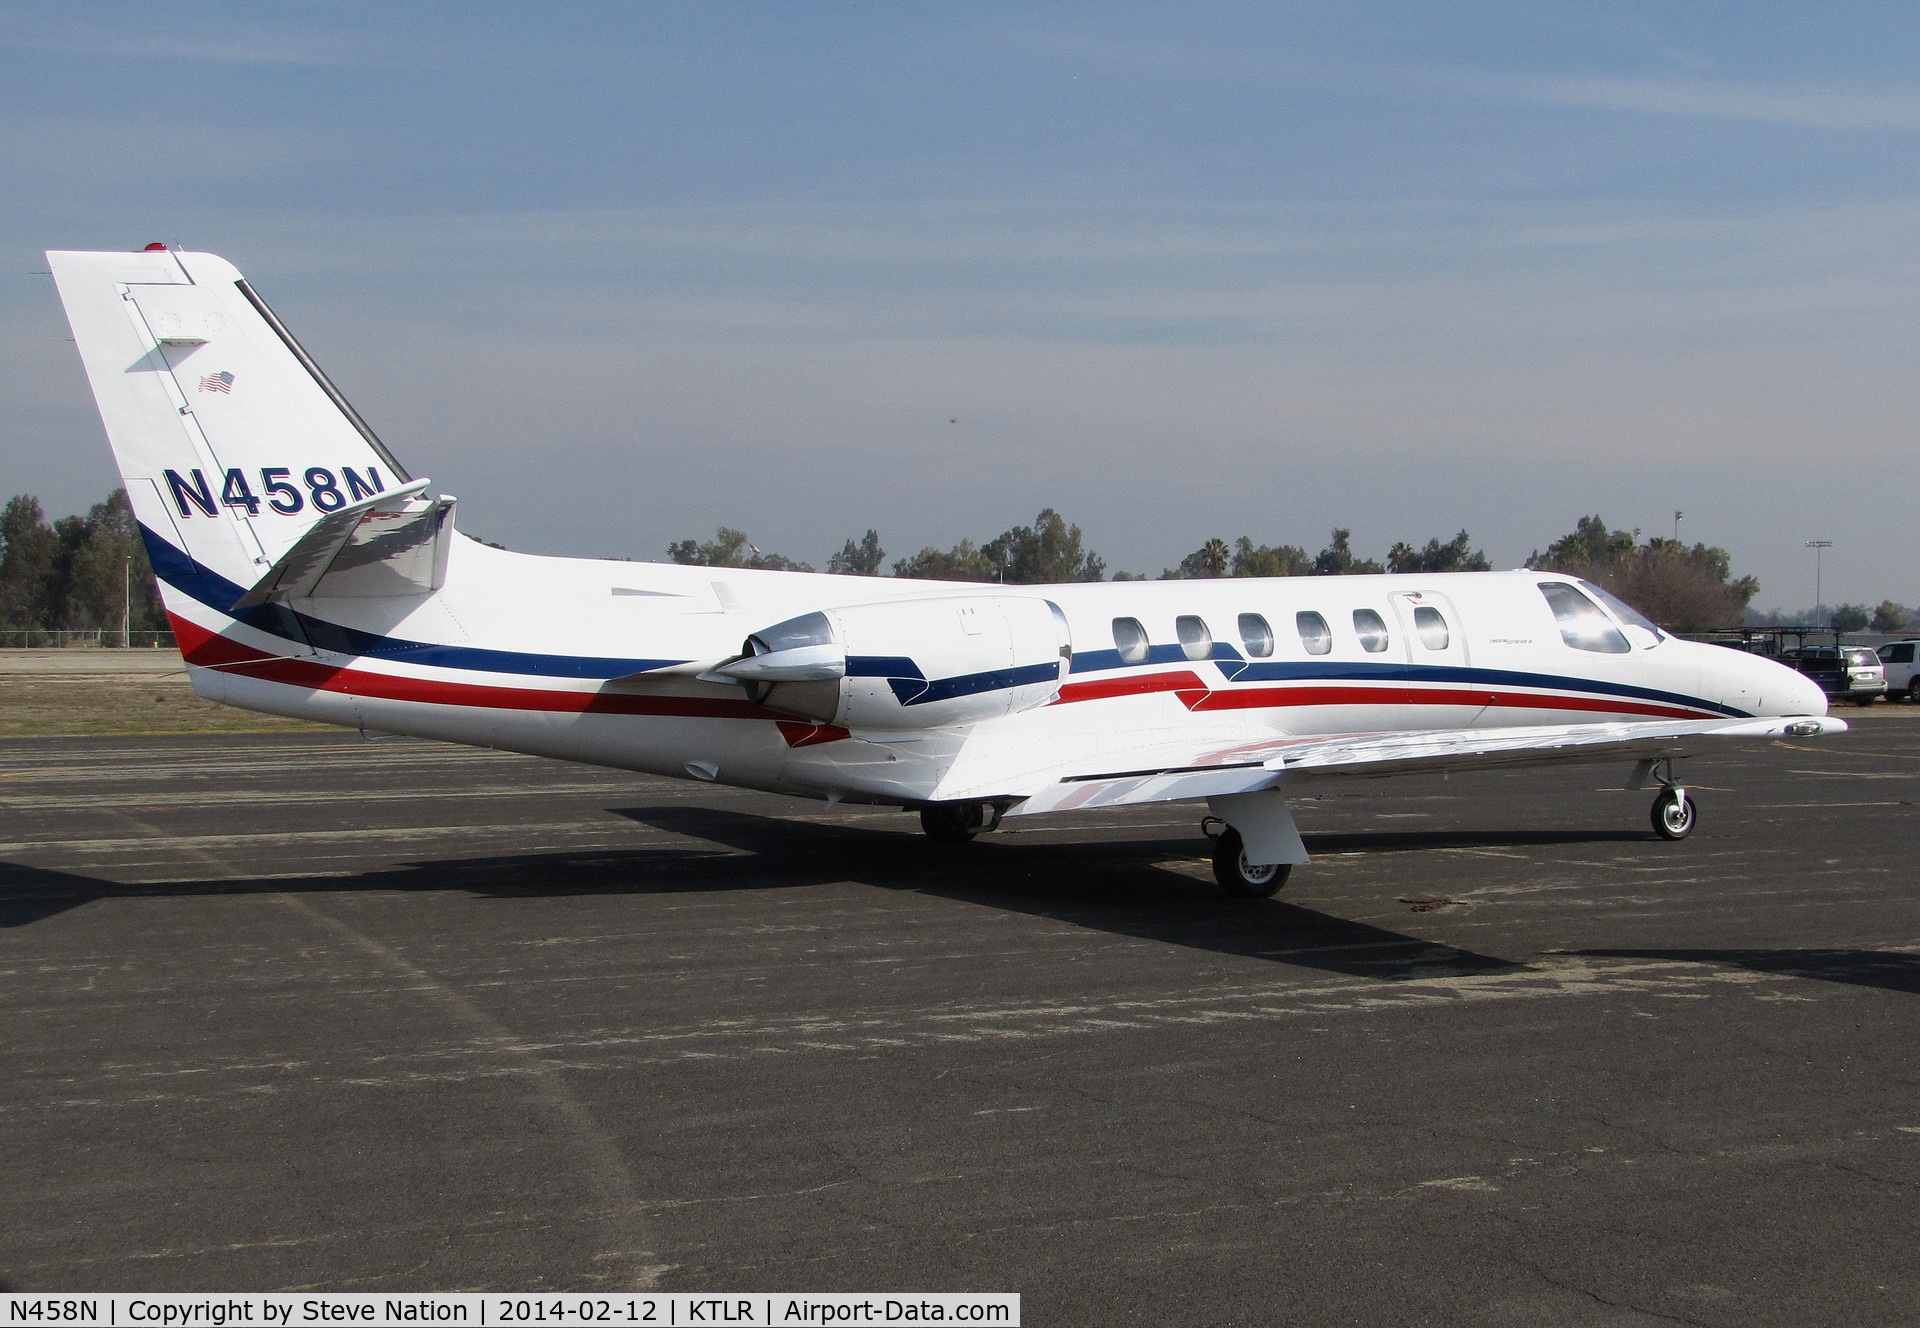 N458N, 1979 Cessna 550 C/N 550-0061, Eagle NW Air Cessna 550 @ Mefford Field (Tulare, CA) for 2014 International Ag Expo